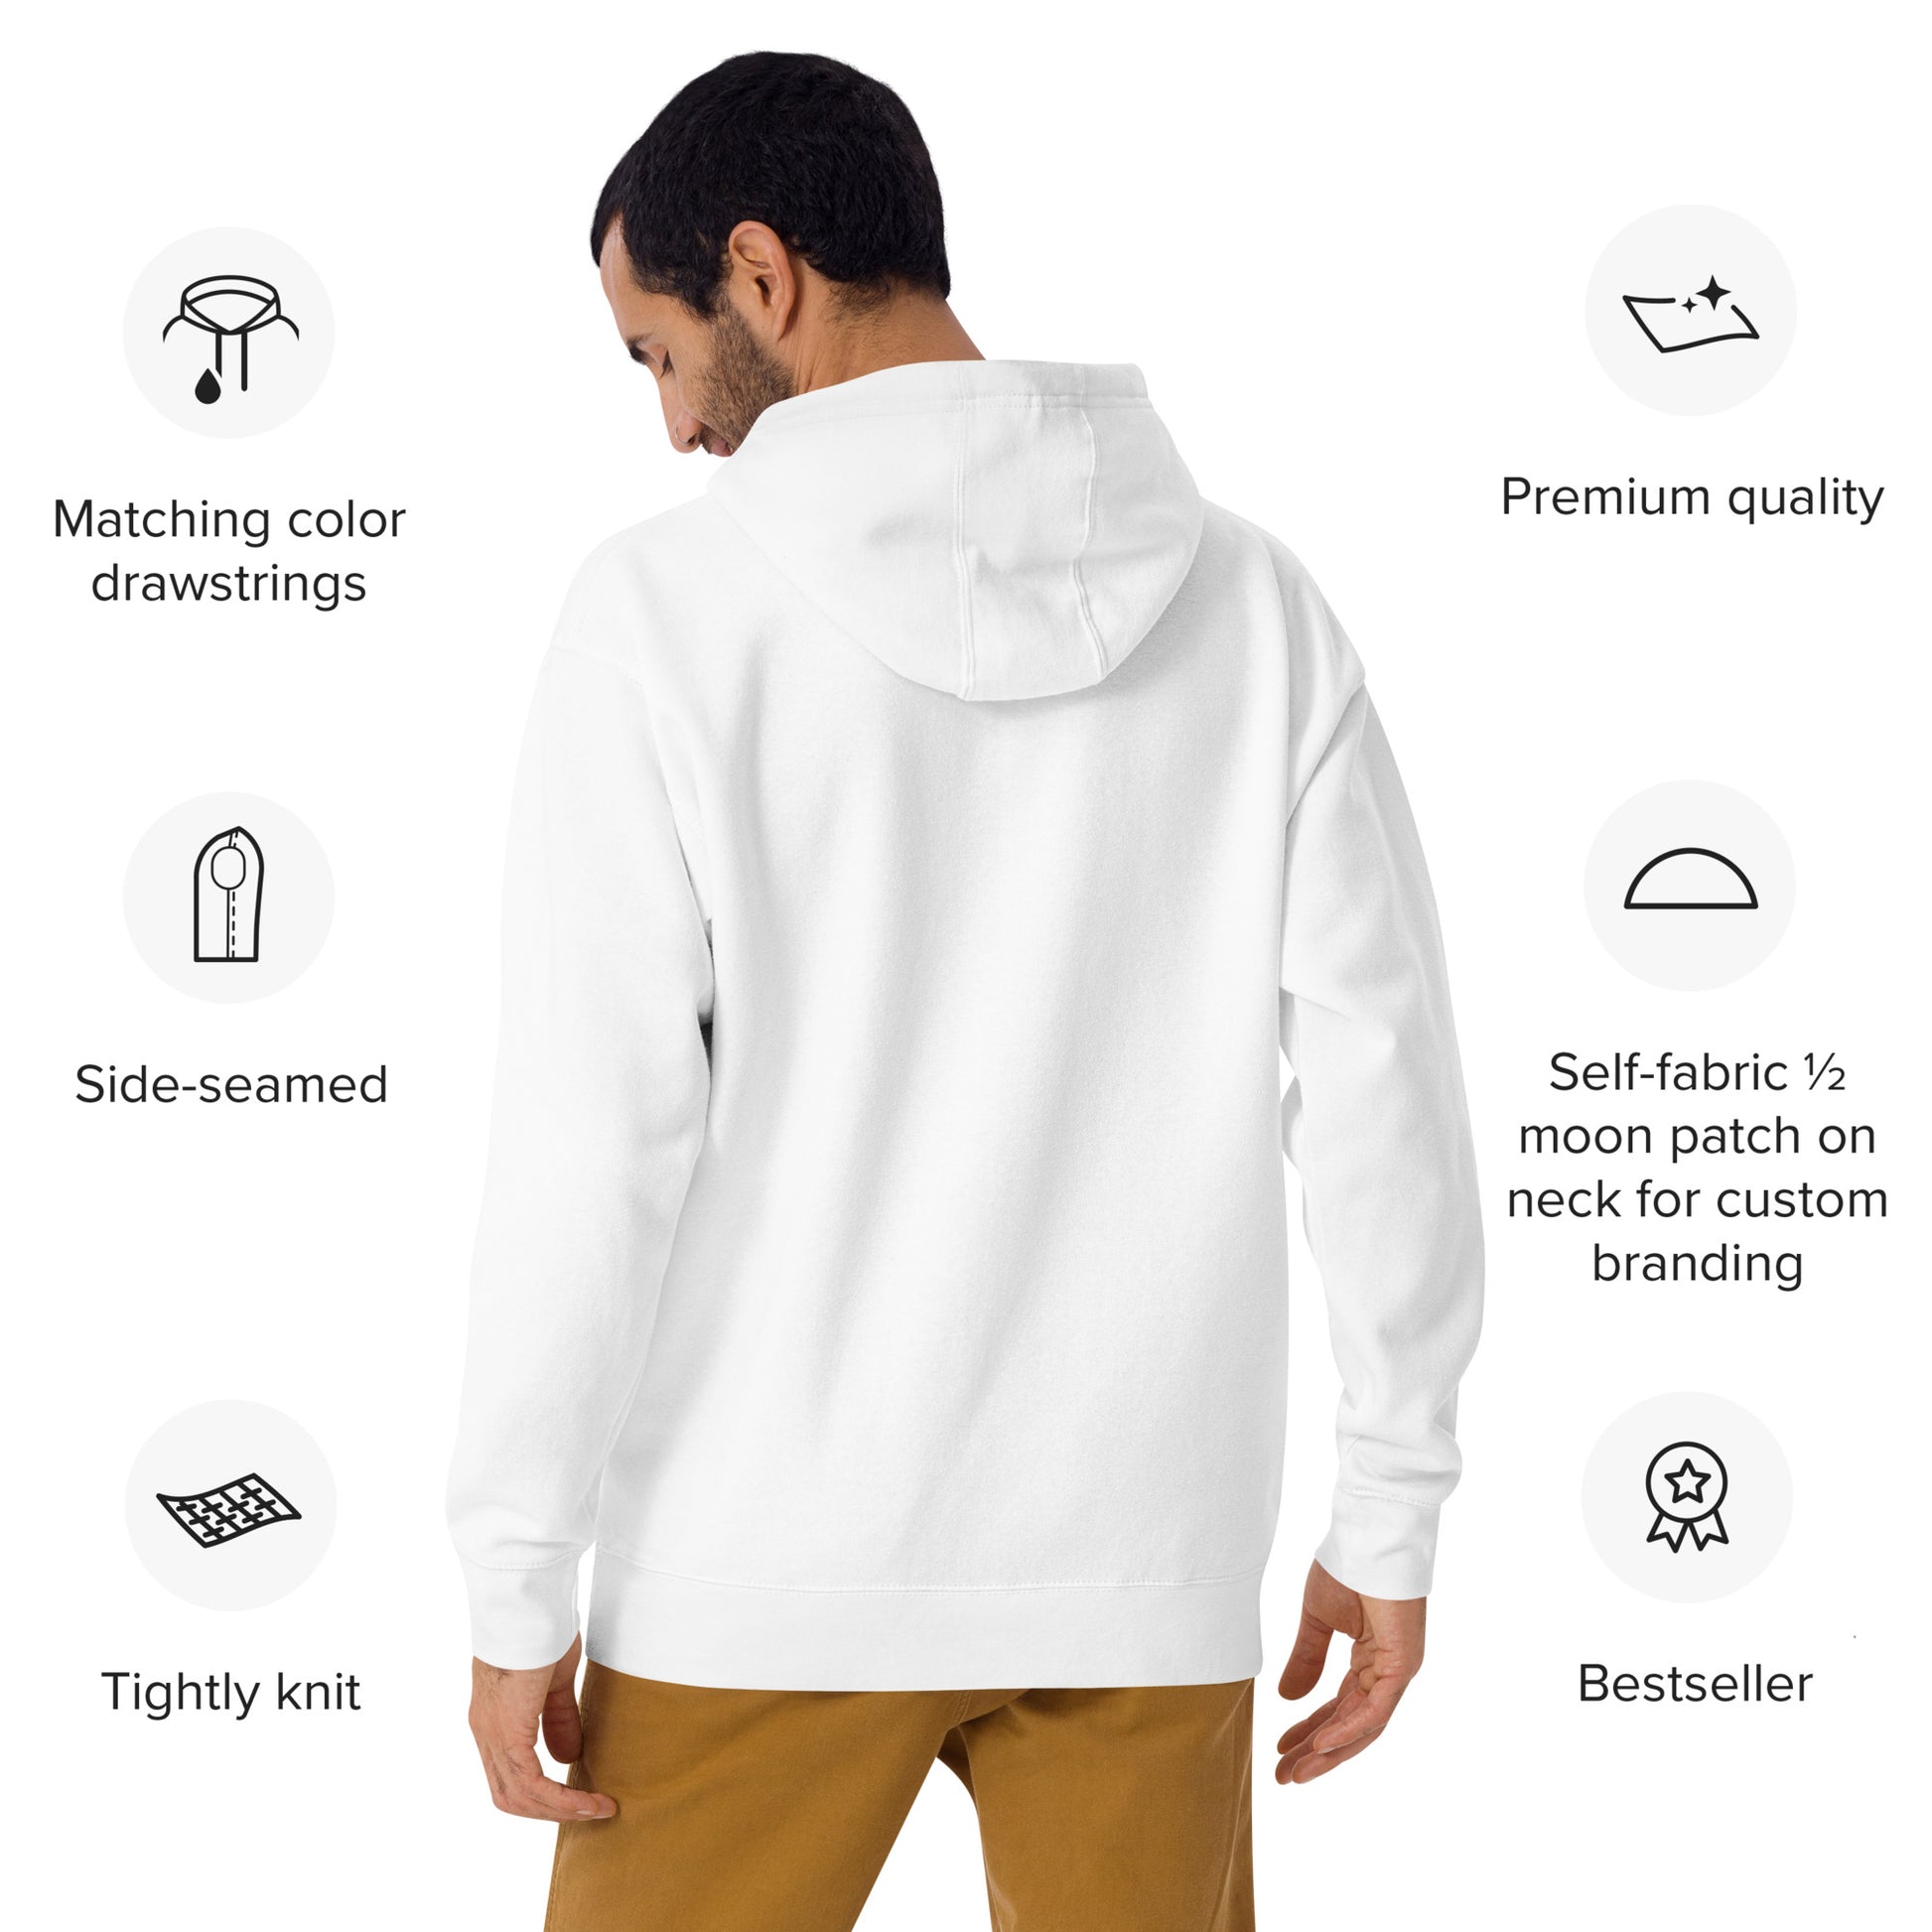 back of the hoodie with product highlight such as matching color drawstrings